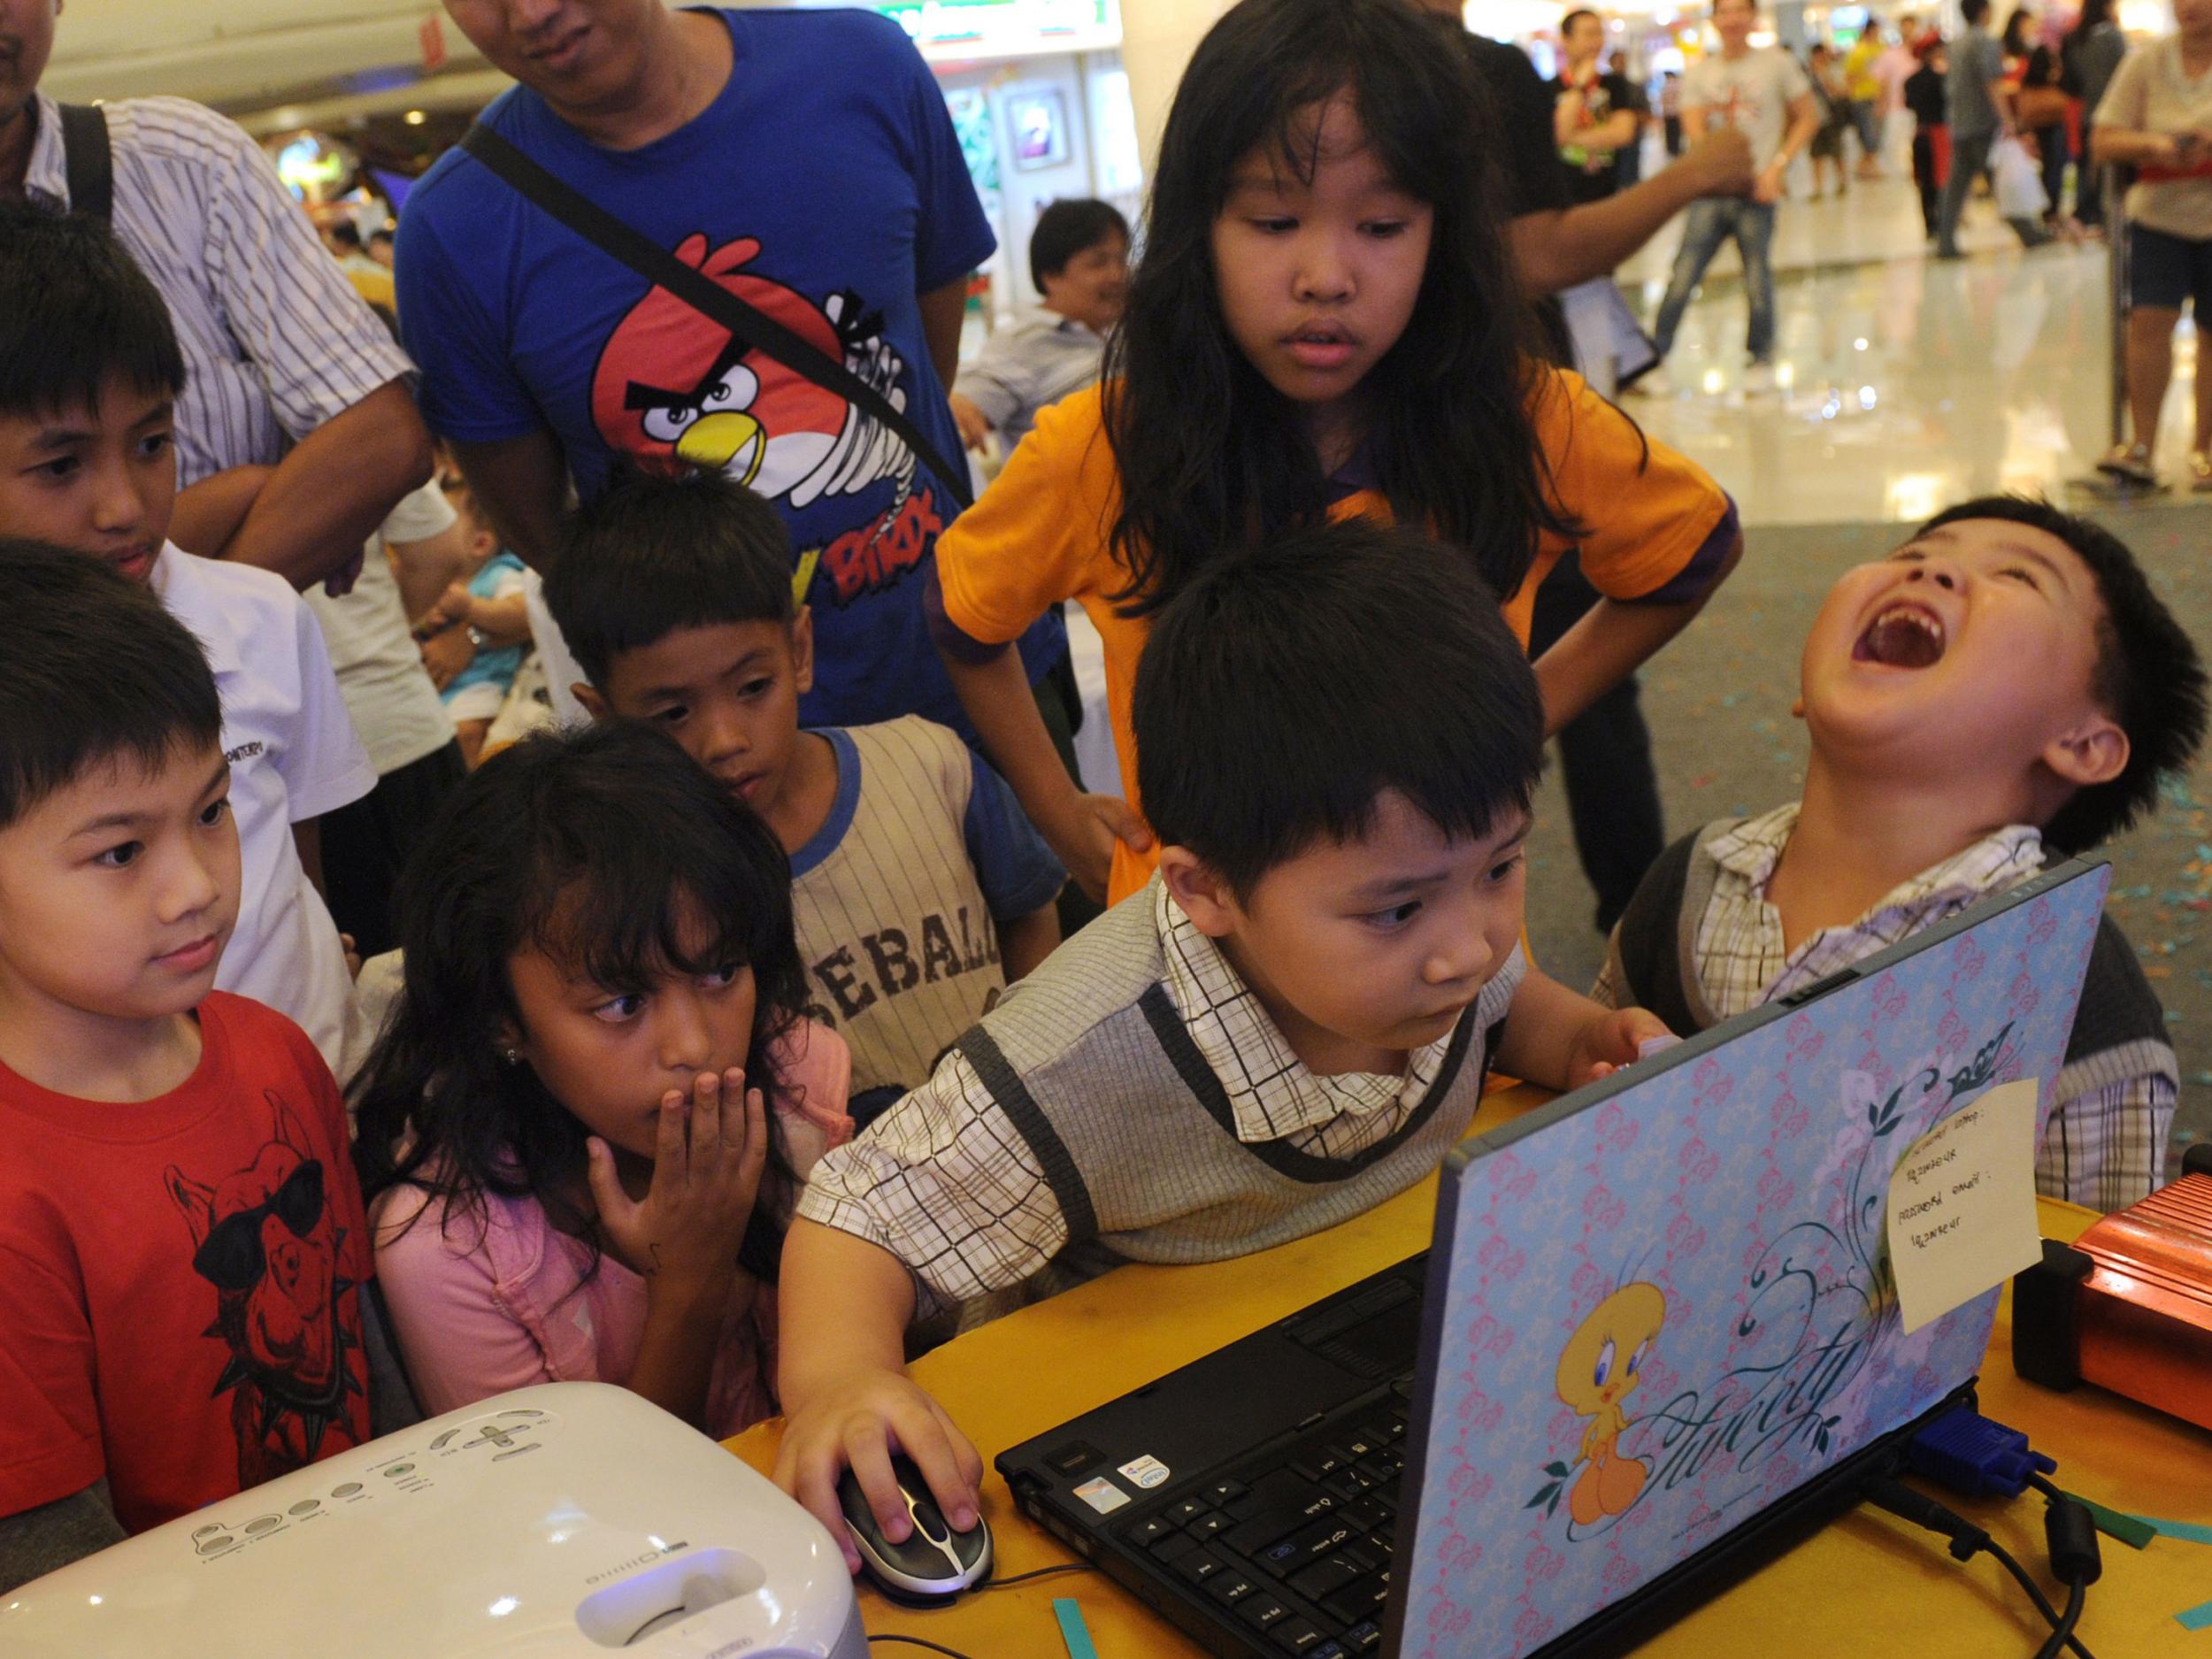 Children play Angry Birds on a laptop in an Indonesian shopping centre in 2012